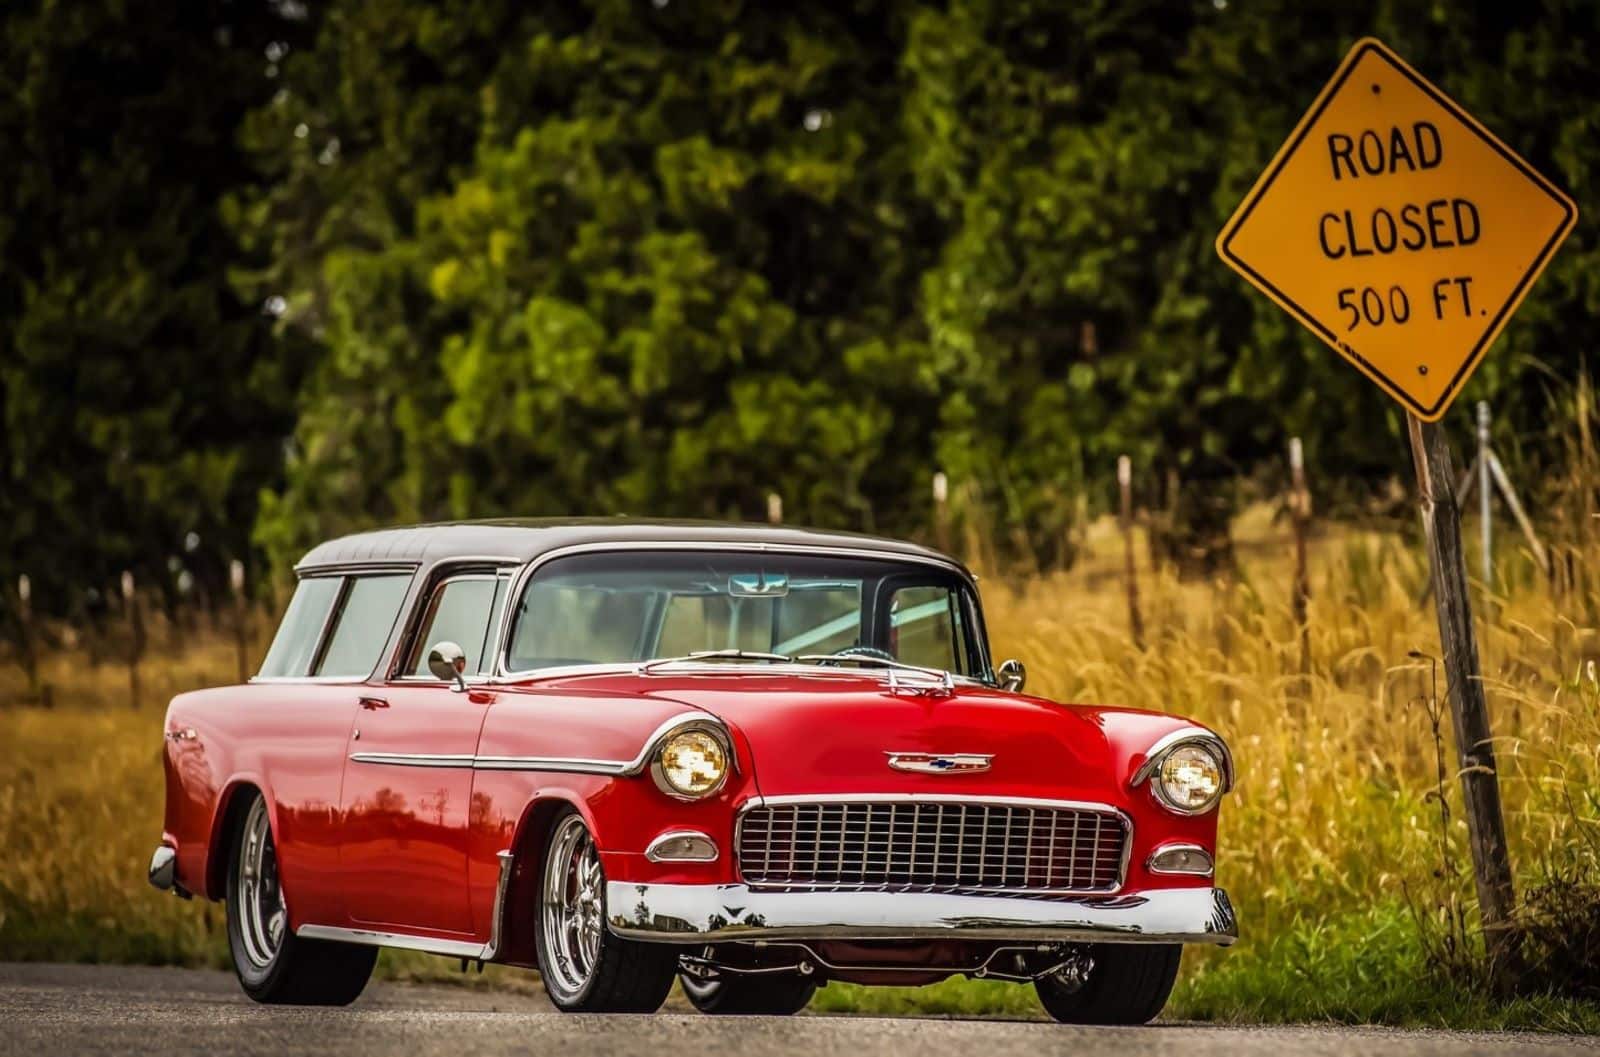 Image Credit: Shutterstock / The Image Engine <p>Many insurers offer lower rates for classic cars that are driven under a certain number of miles annually. This reflects the decreased risk of accidents with less frequent use.</p>